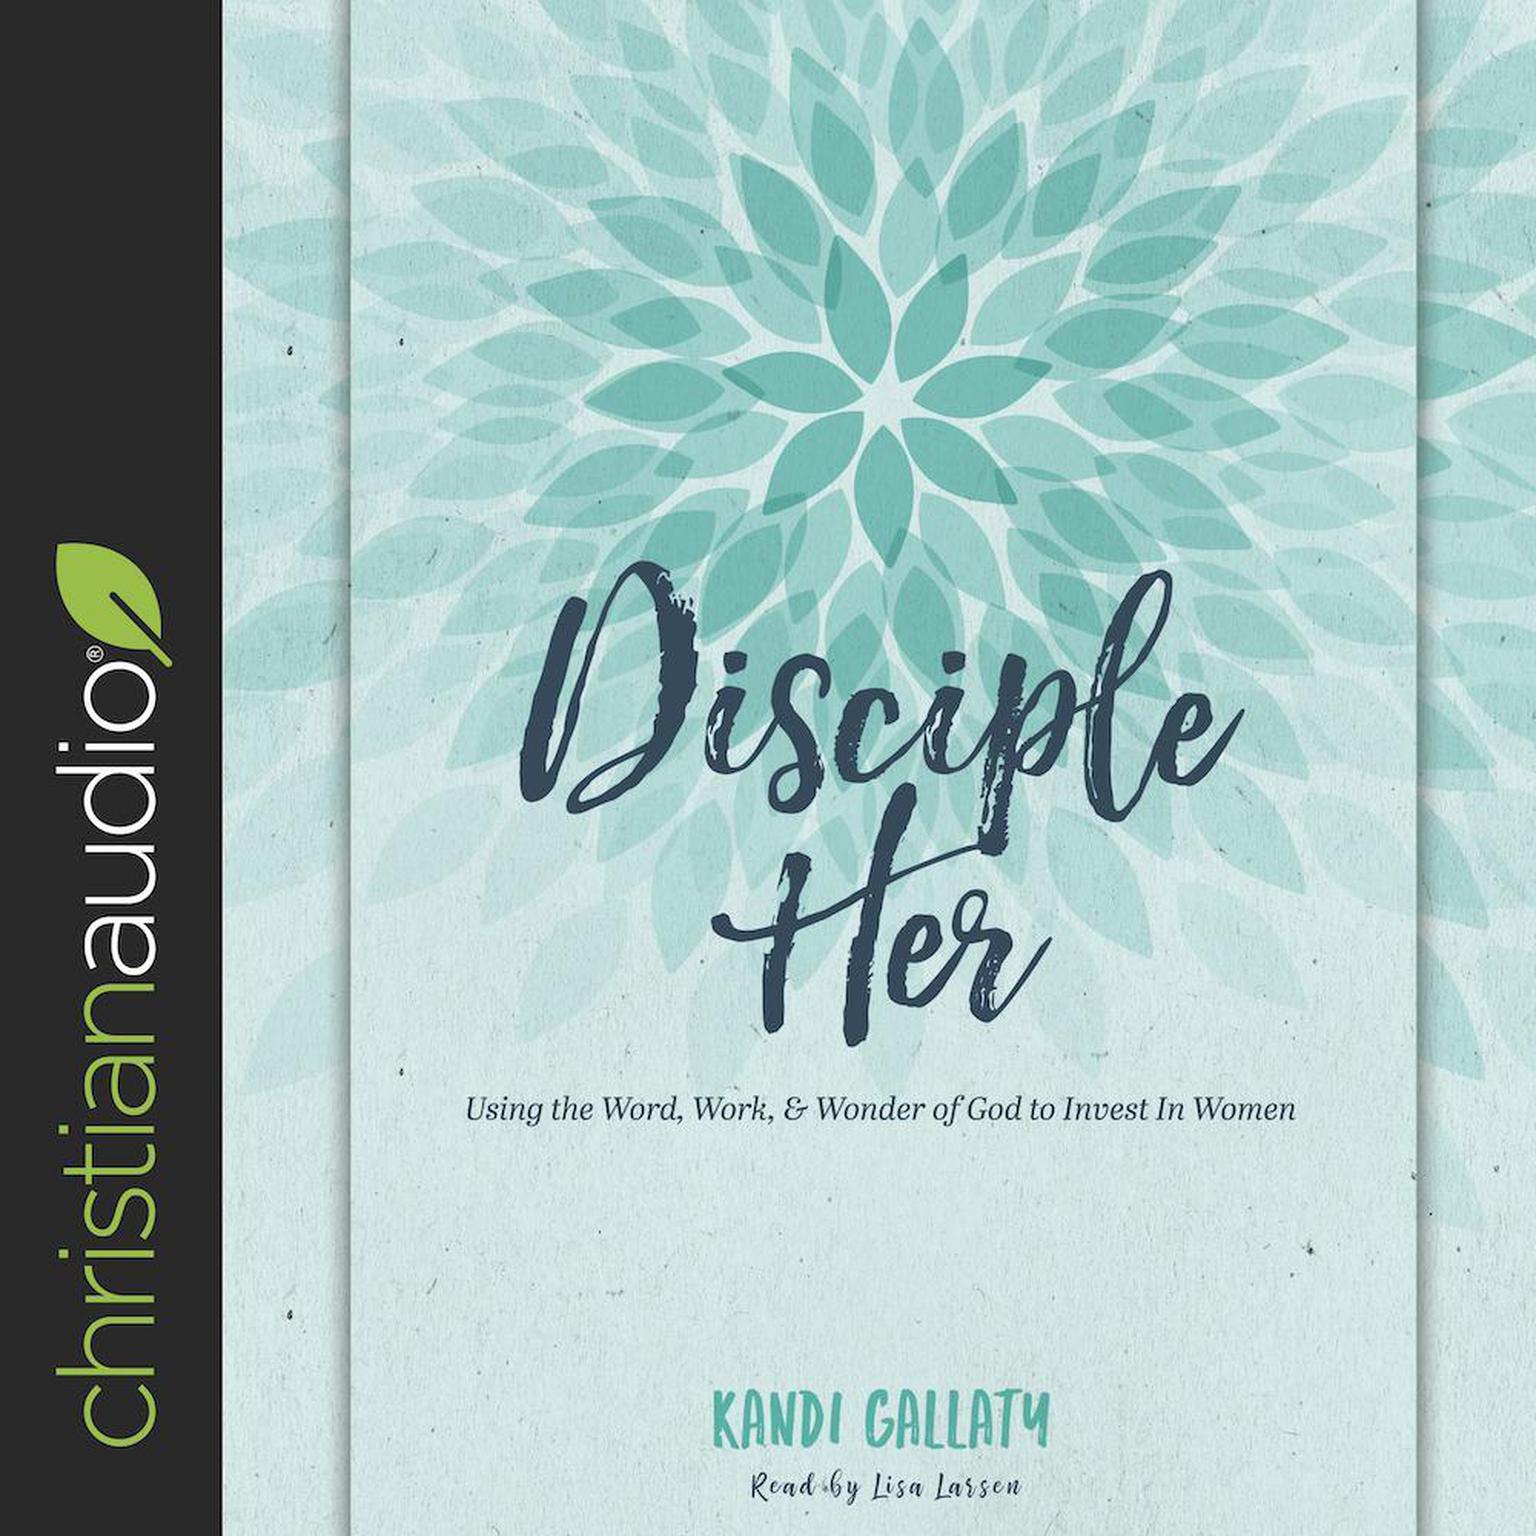 Disciple Her: Using the Word, Work, & Wonder of God to Invest in Women Audiobook, by Kandi Gallaty